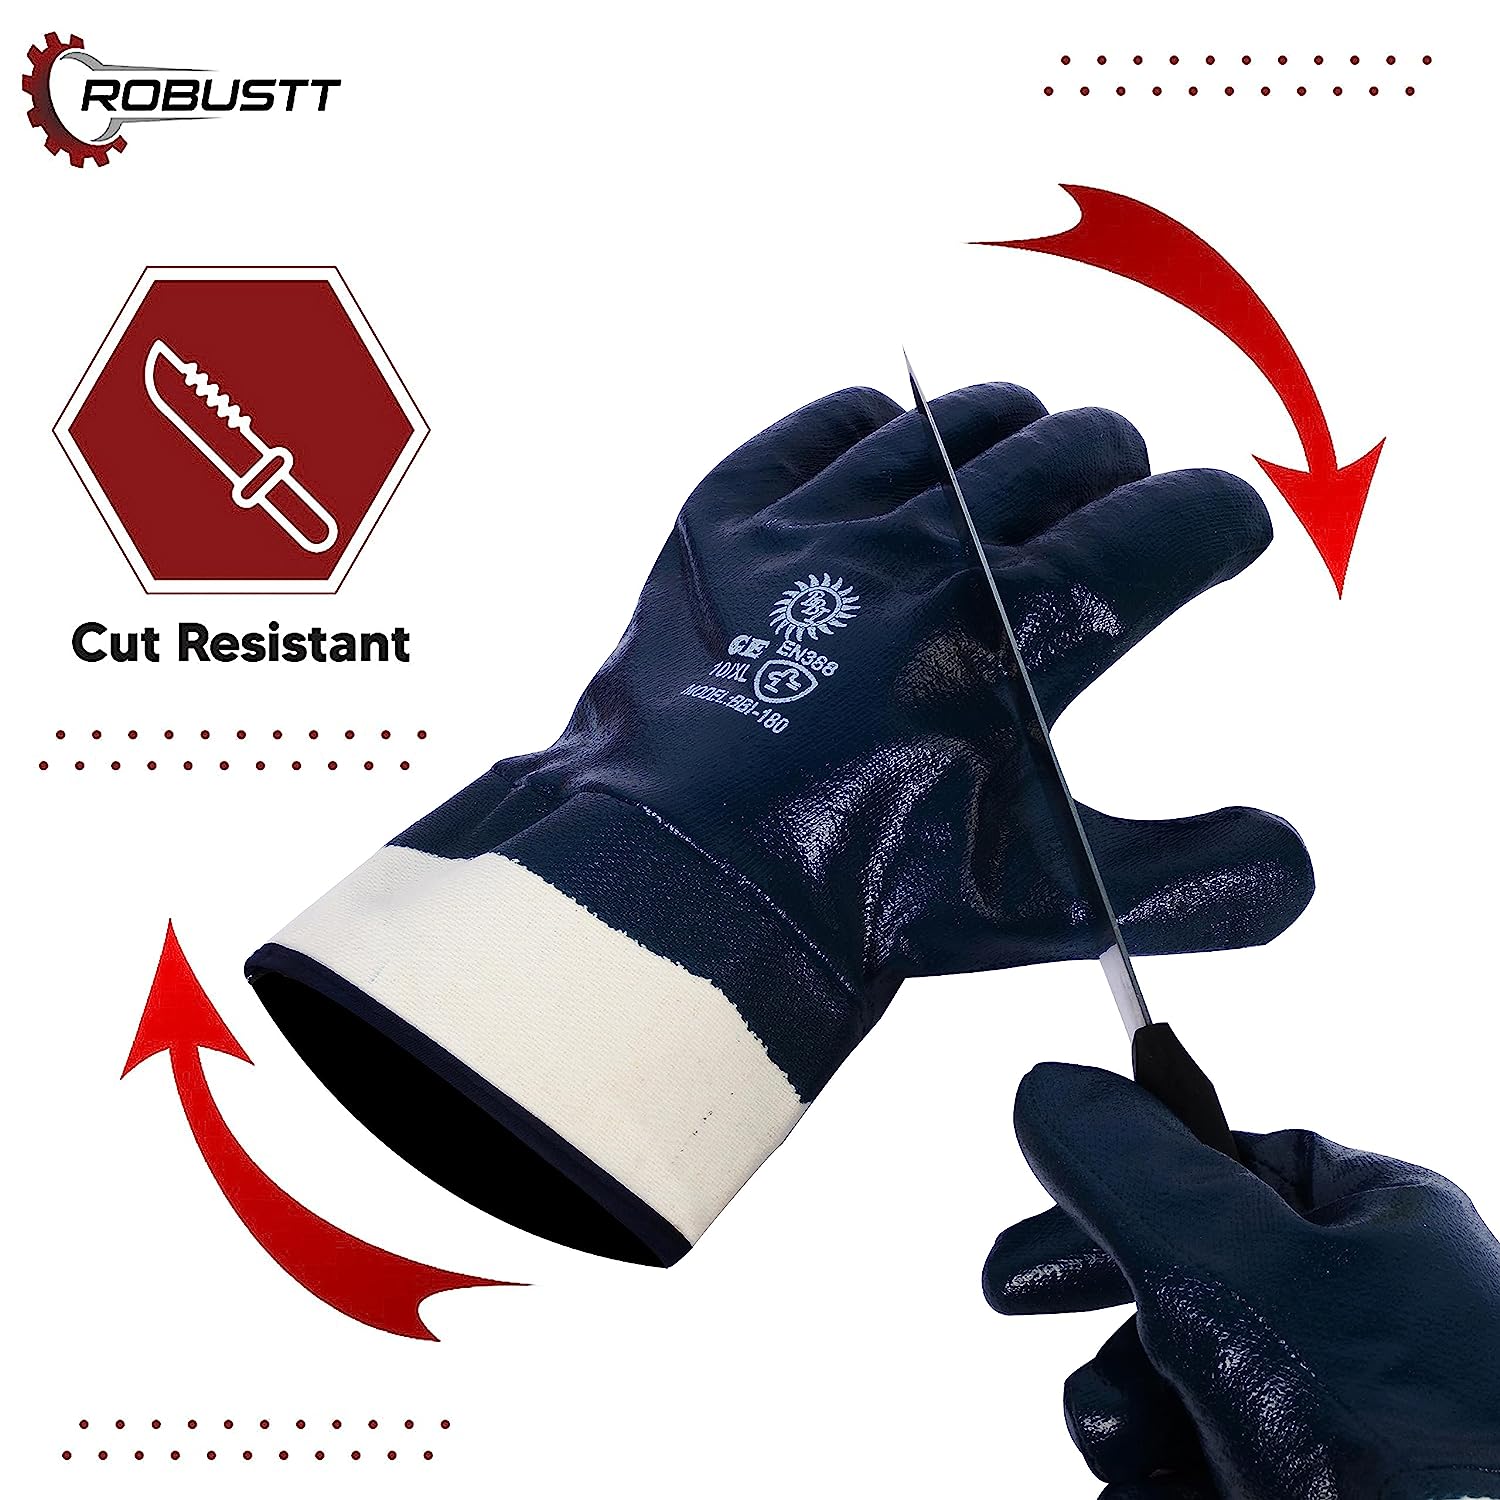 Robustt Industrial Safety Gloves Anti-Cut ( Fully Coated Open Cuff ) for  Finger and Hand Protection, Heat Resistant, Cut Proof, Water Resistant, PVC